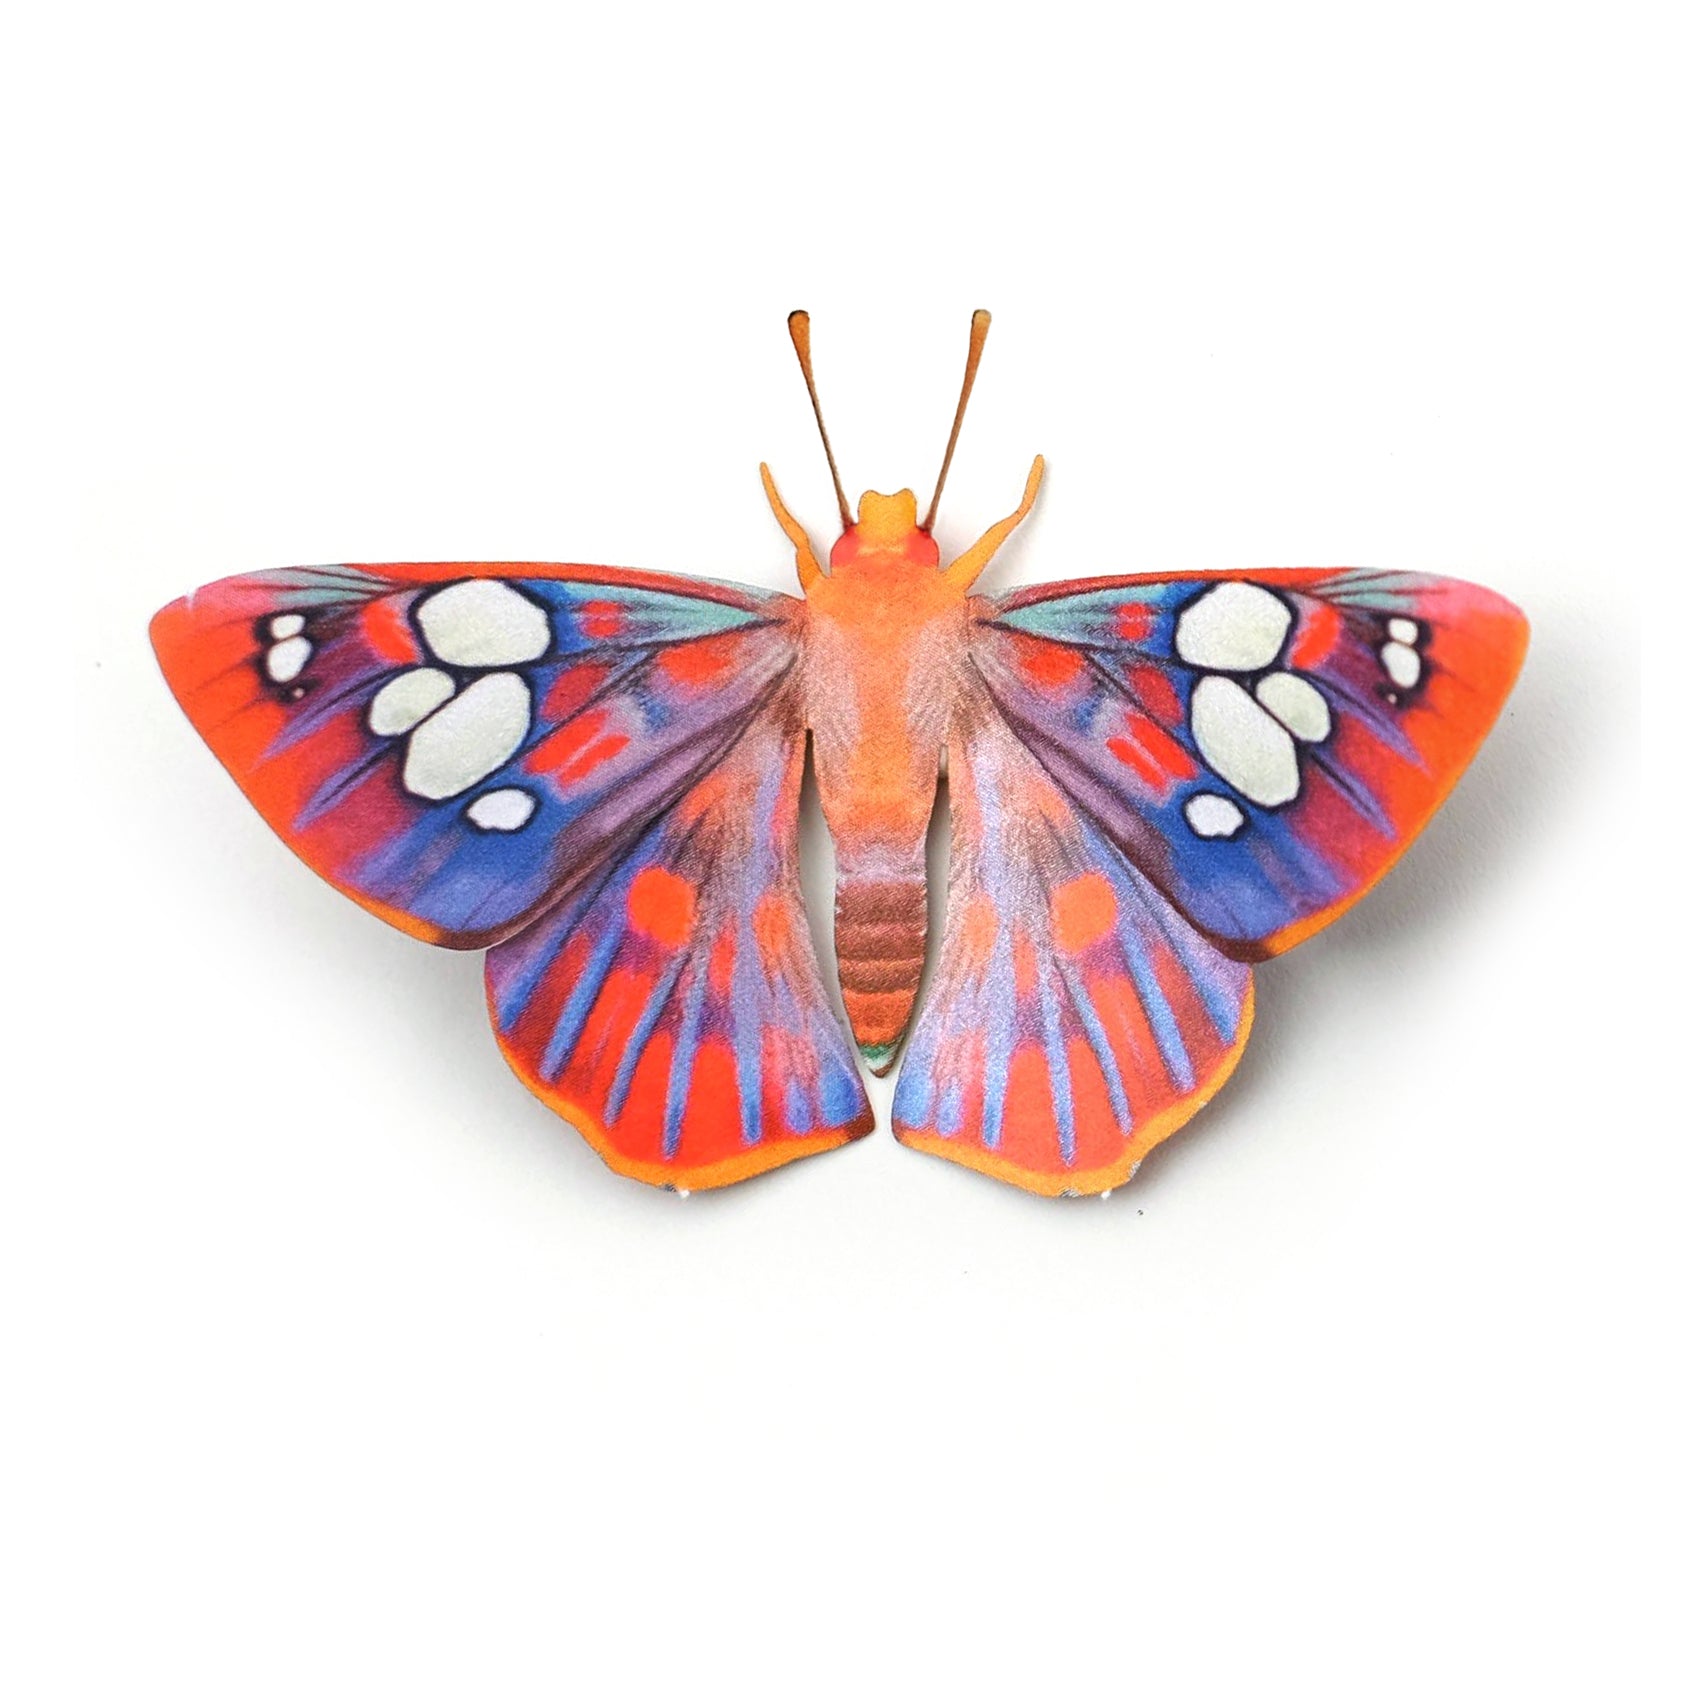 'Rare Red-Eyed Flat' Butterfly